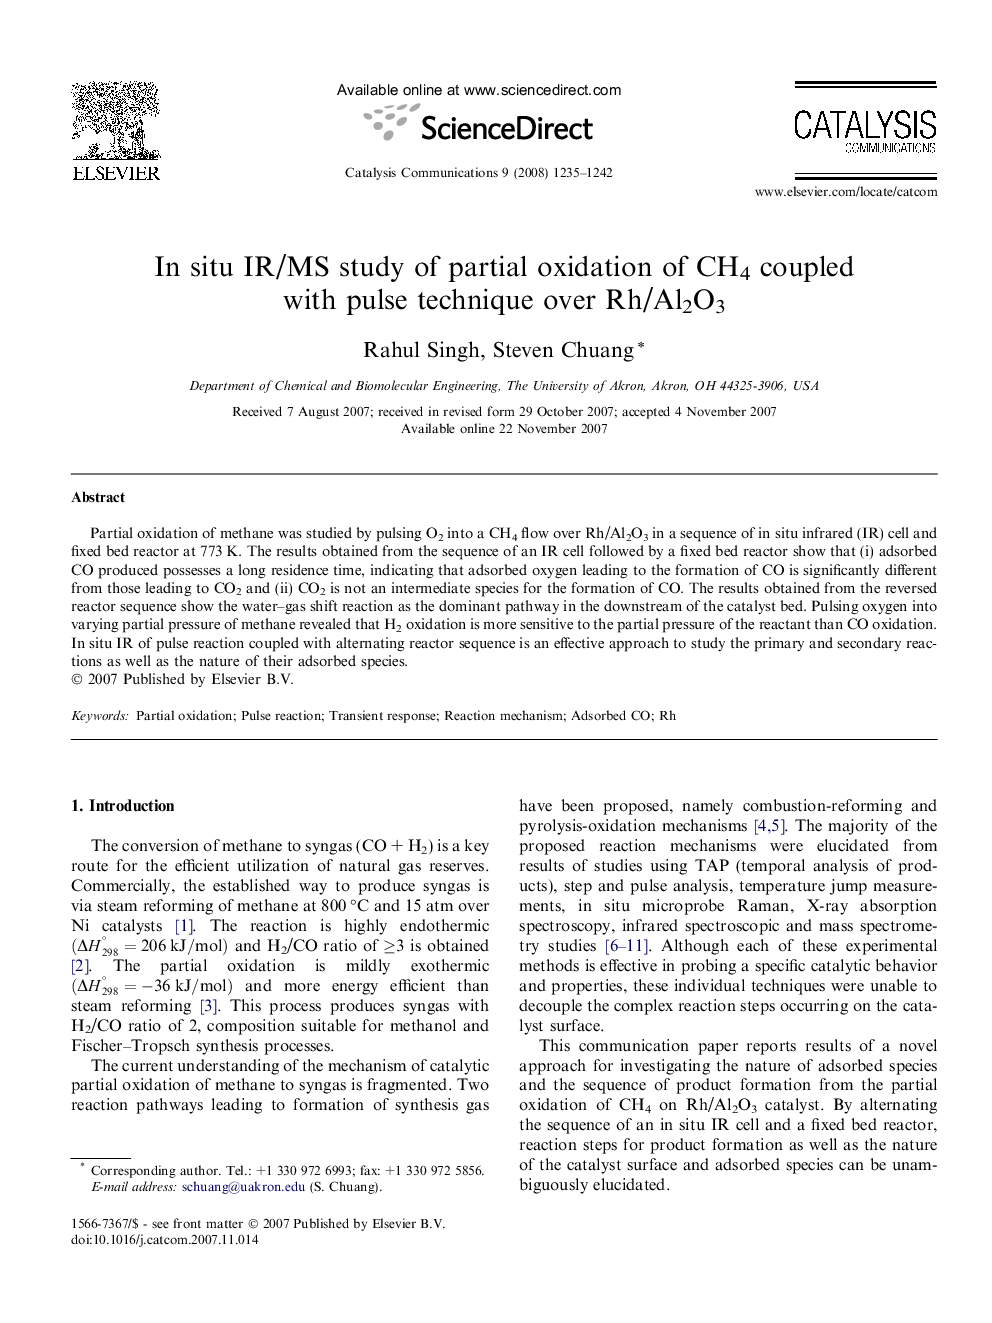 In situ IR/MS study of partial oxidation of CH4 coupled with pulse technique over Rh/Al2O3